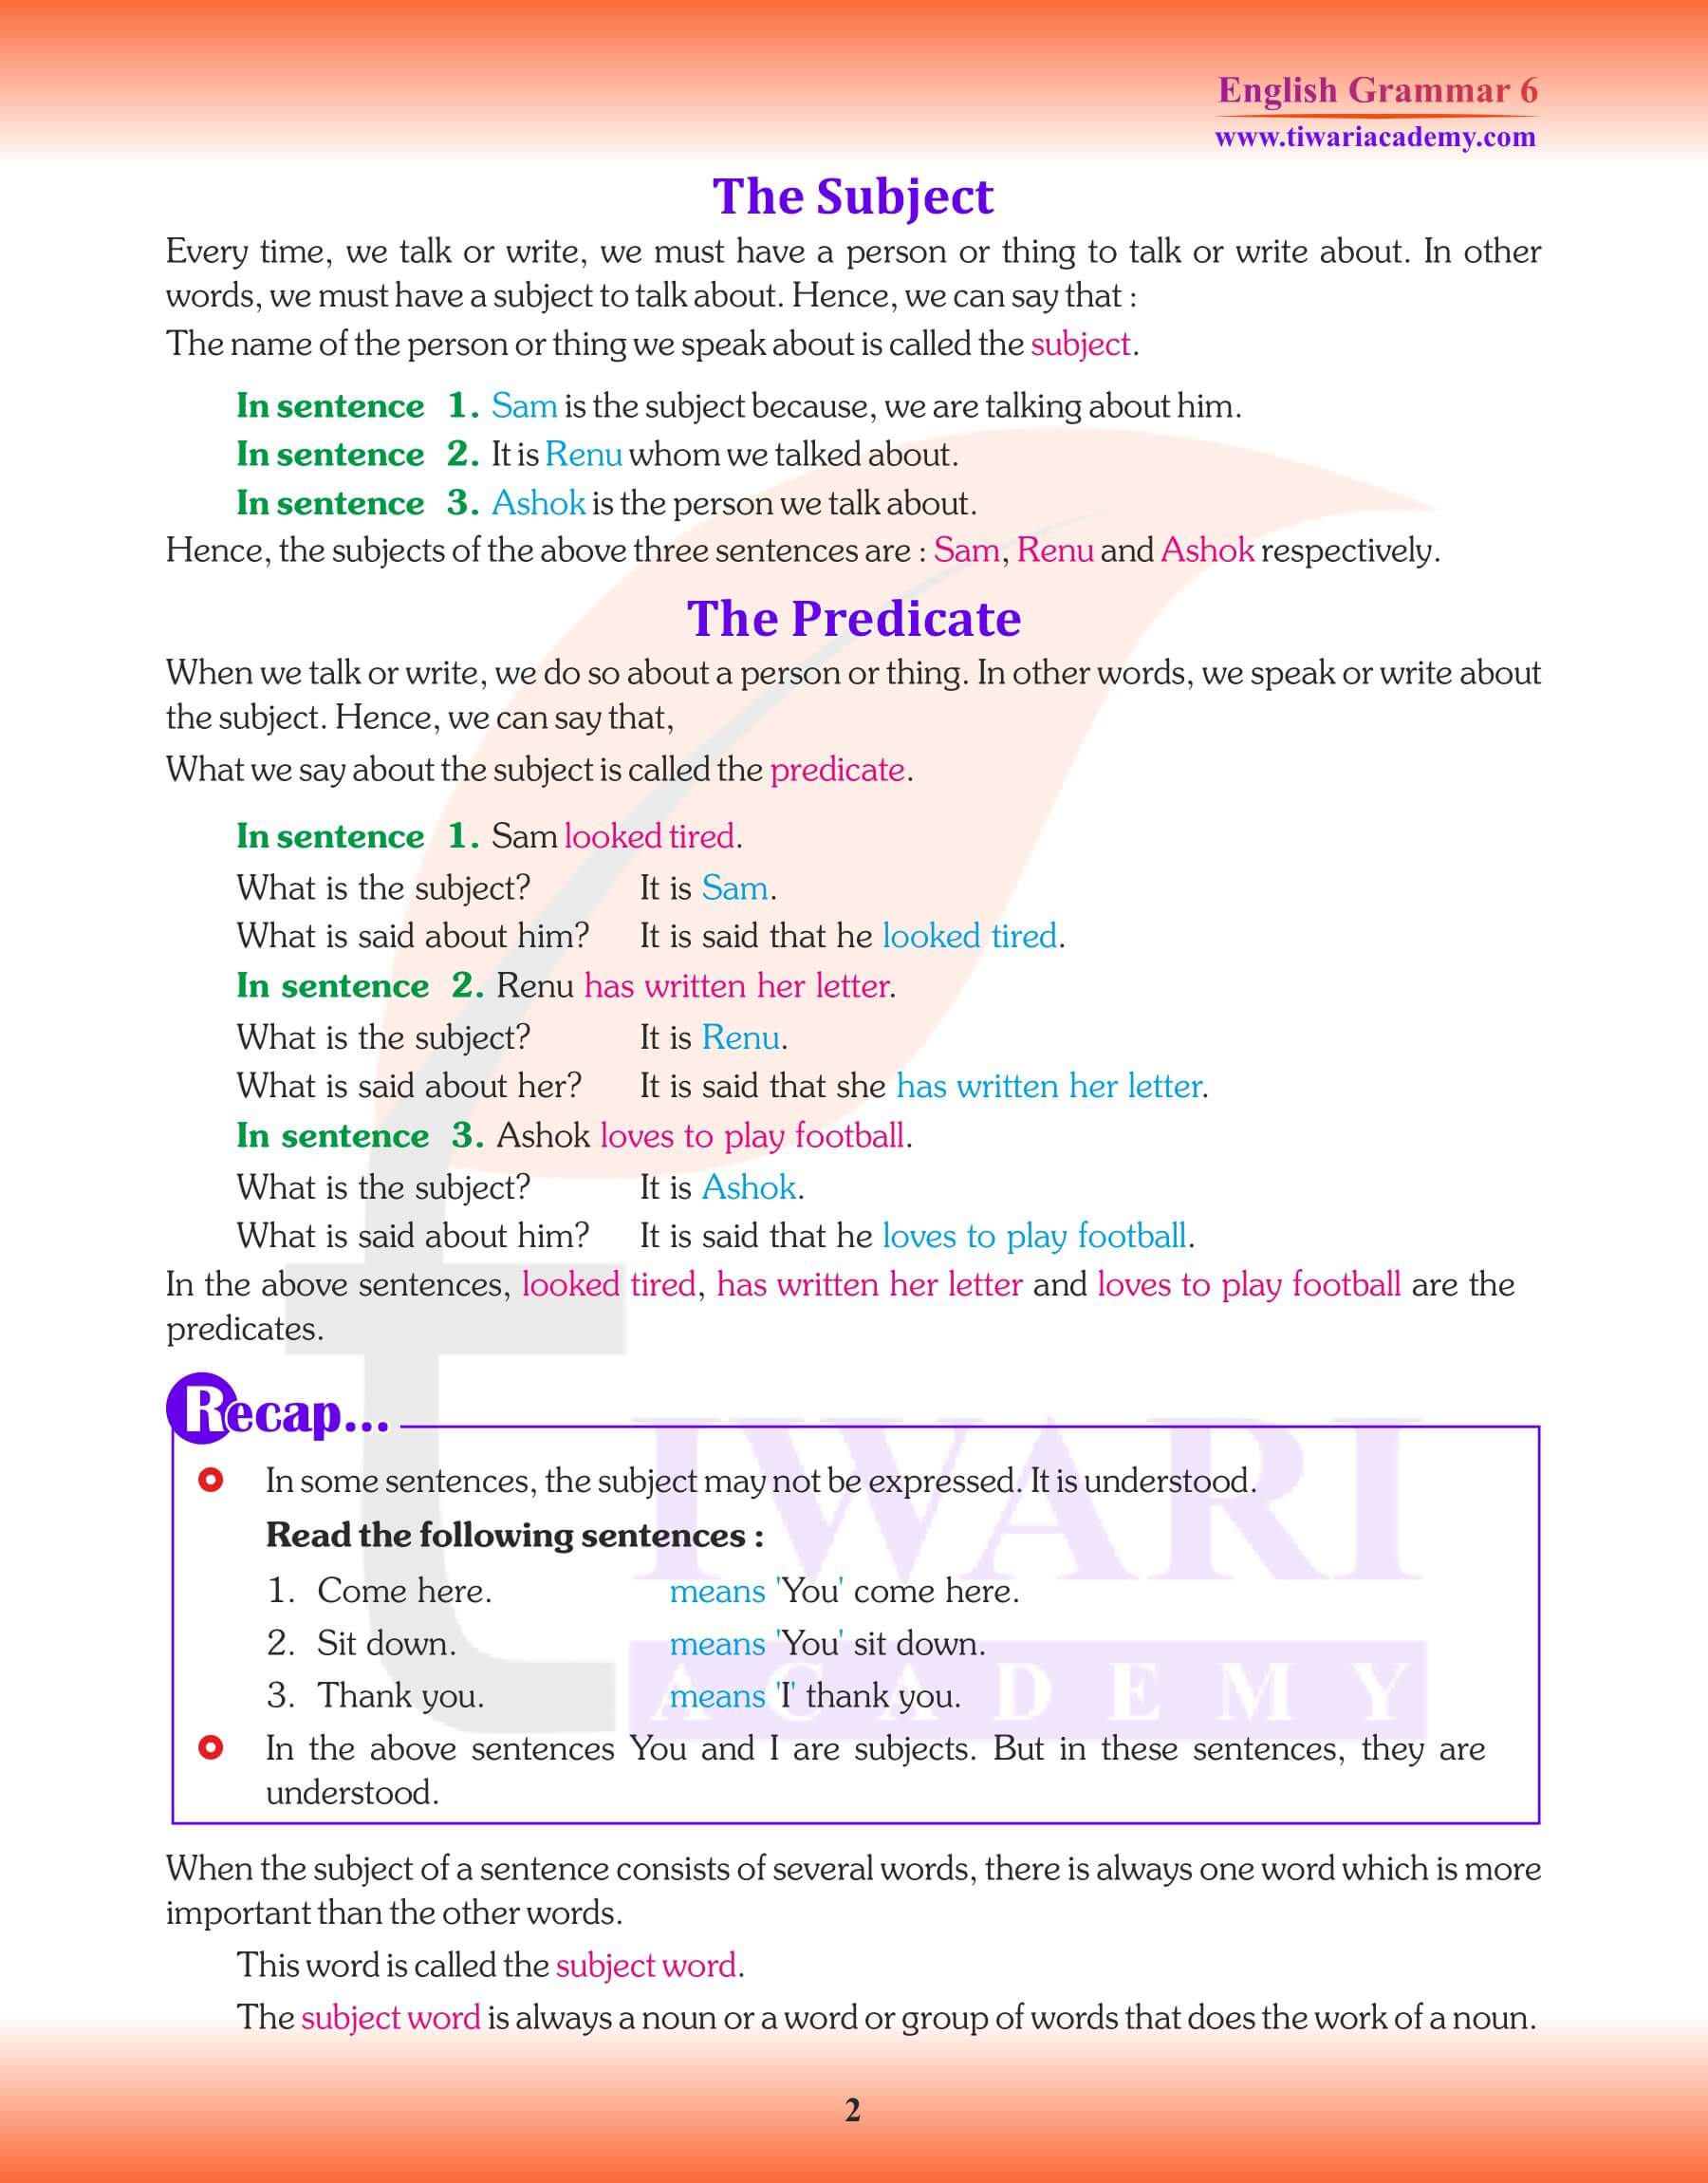 Class 6 Grammar Parts of the Sentence Revision